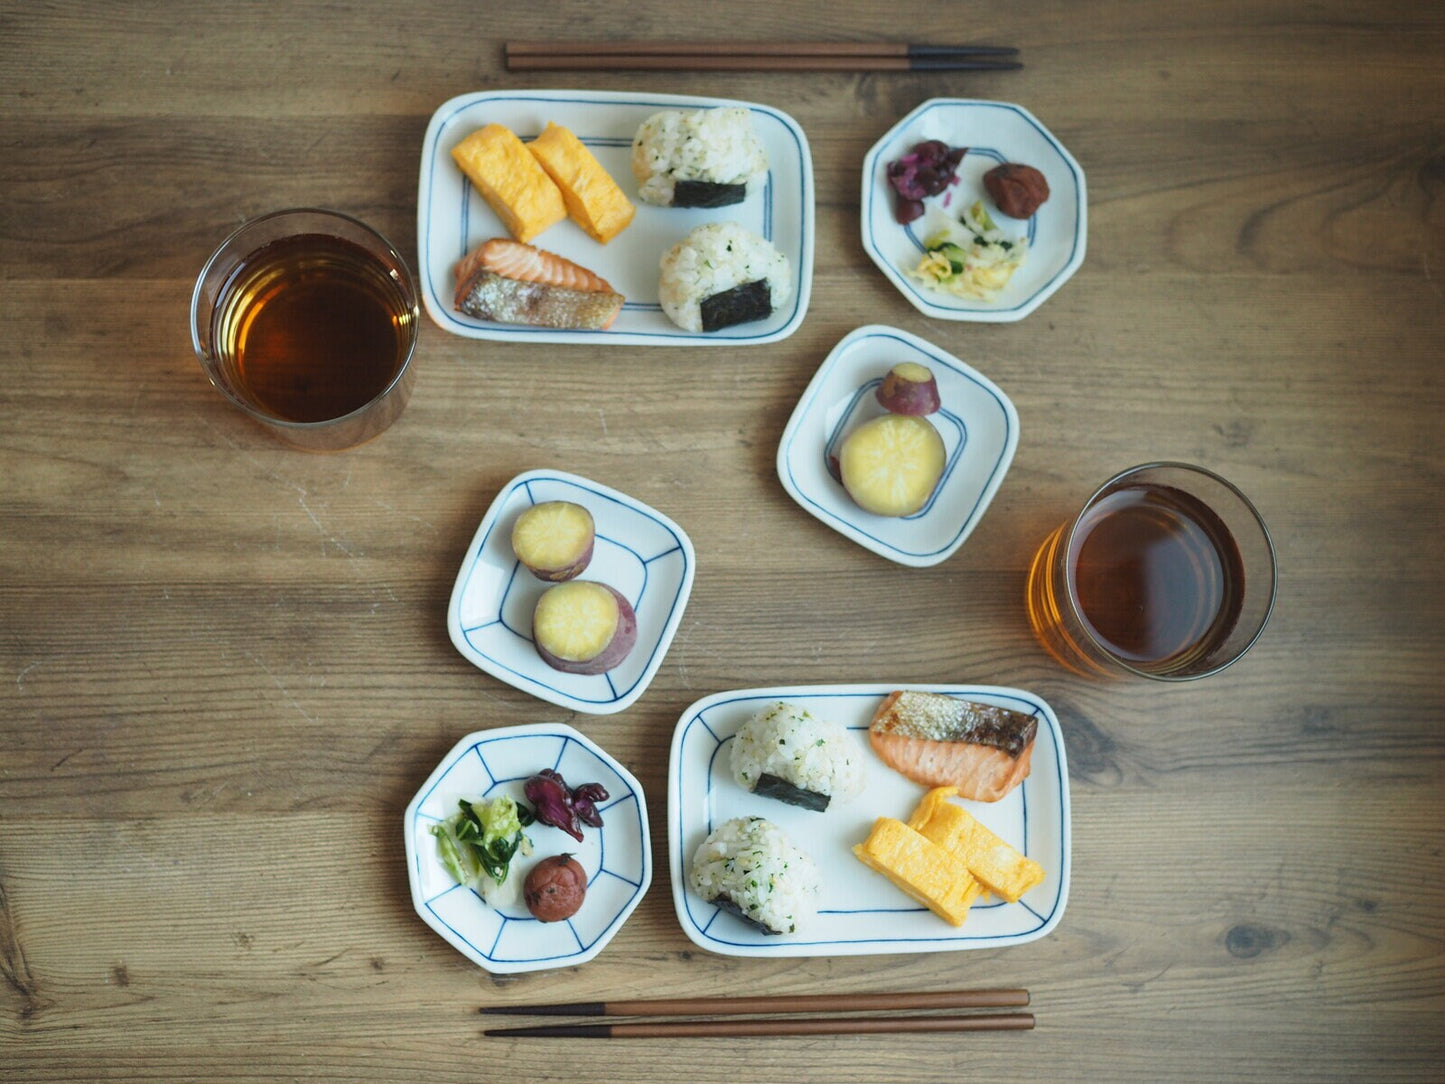 Assortment Set of 3 Blue and White Side Dishes - KANESE NODA 記幸窯